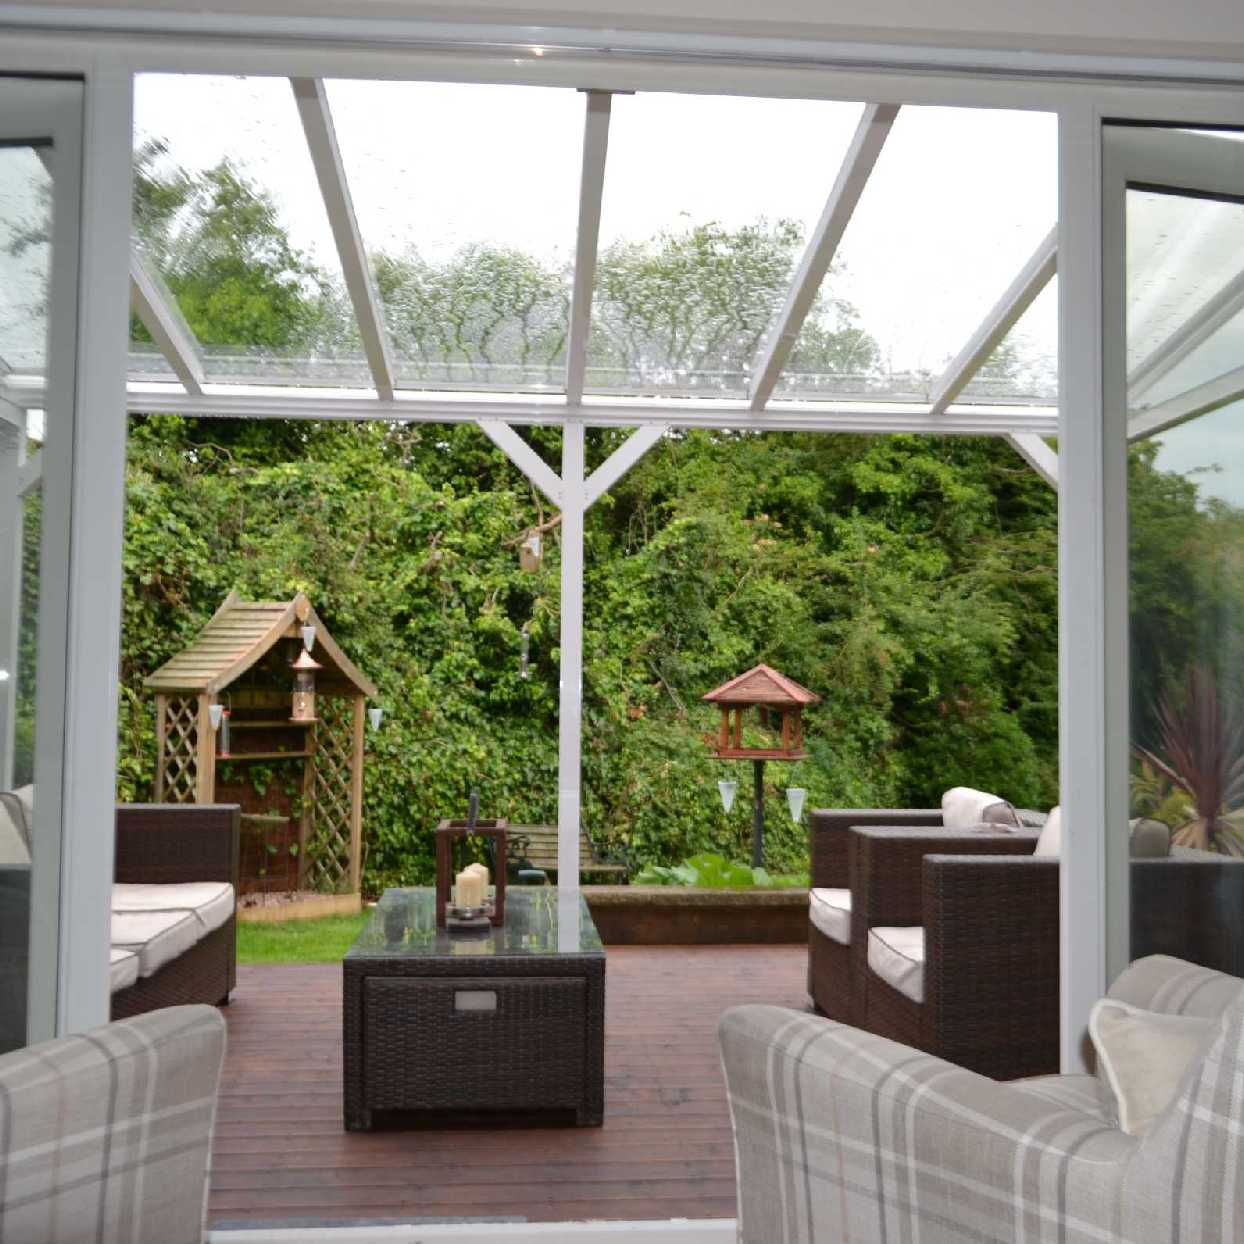 Buy Omega Smart Free-Standing, White MonoPitch Roof Canopy with 6mm Glass Clear Plate Polycarbonate Glazing - 4.2m (W) x 2.5m (P), (6) Supporting Posts online today